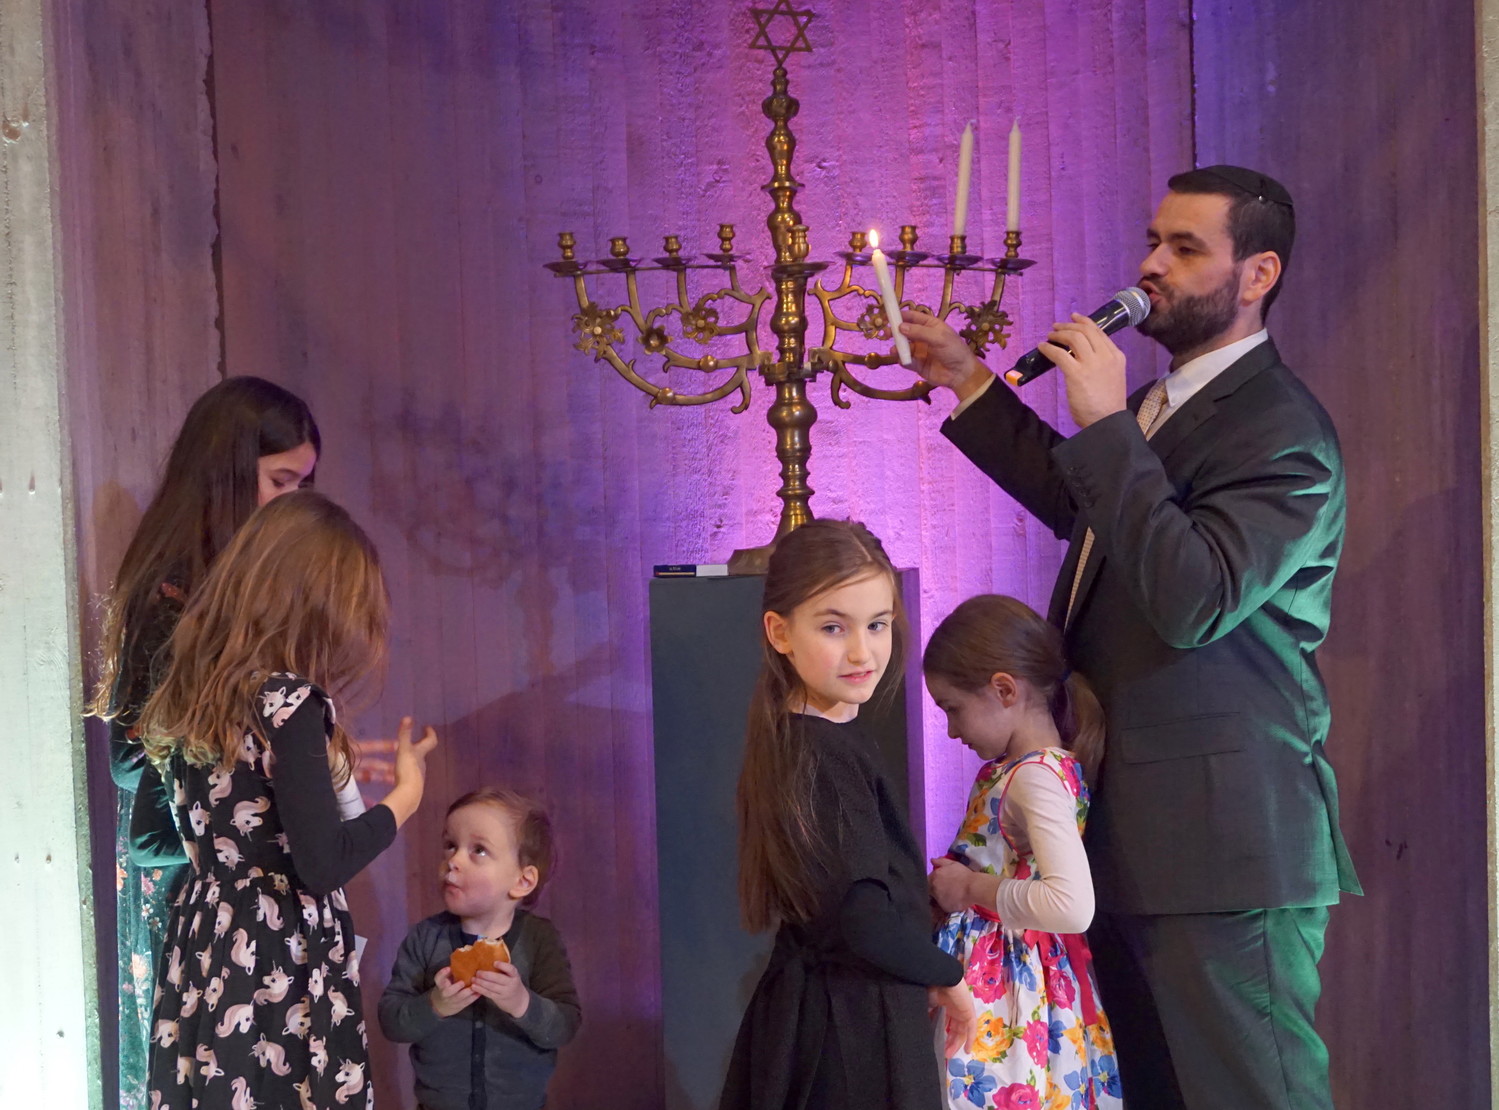 Rabbi Zsolt Balla, who attended the seminar, celebrates Chanukah with his community in Leipzig, Germany.